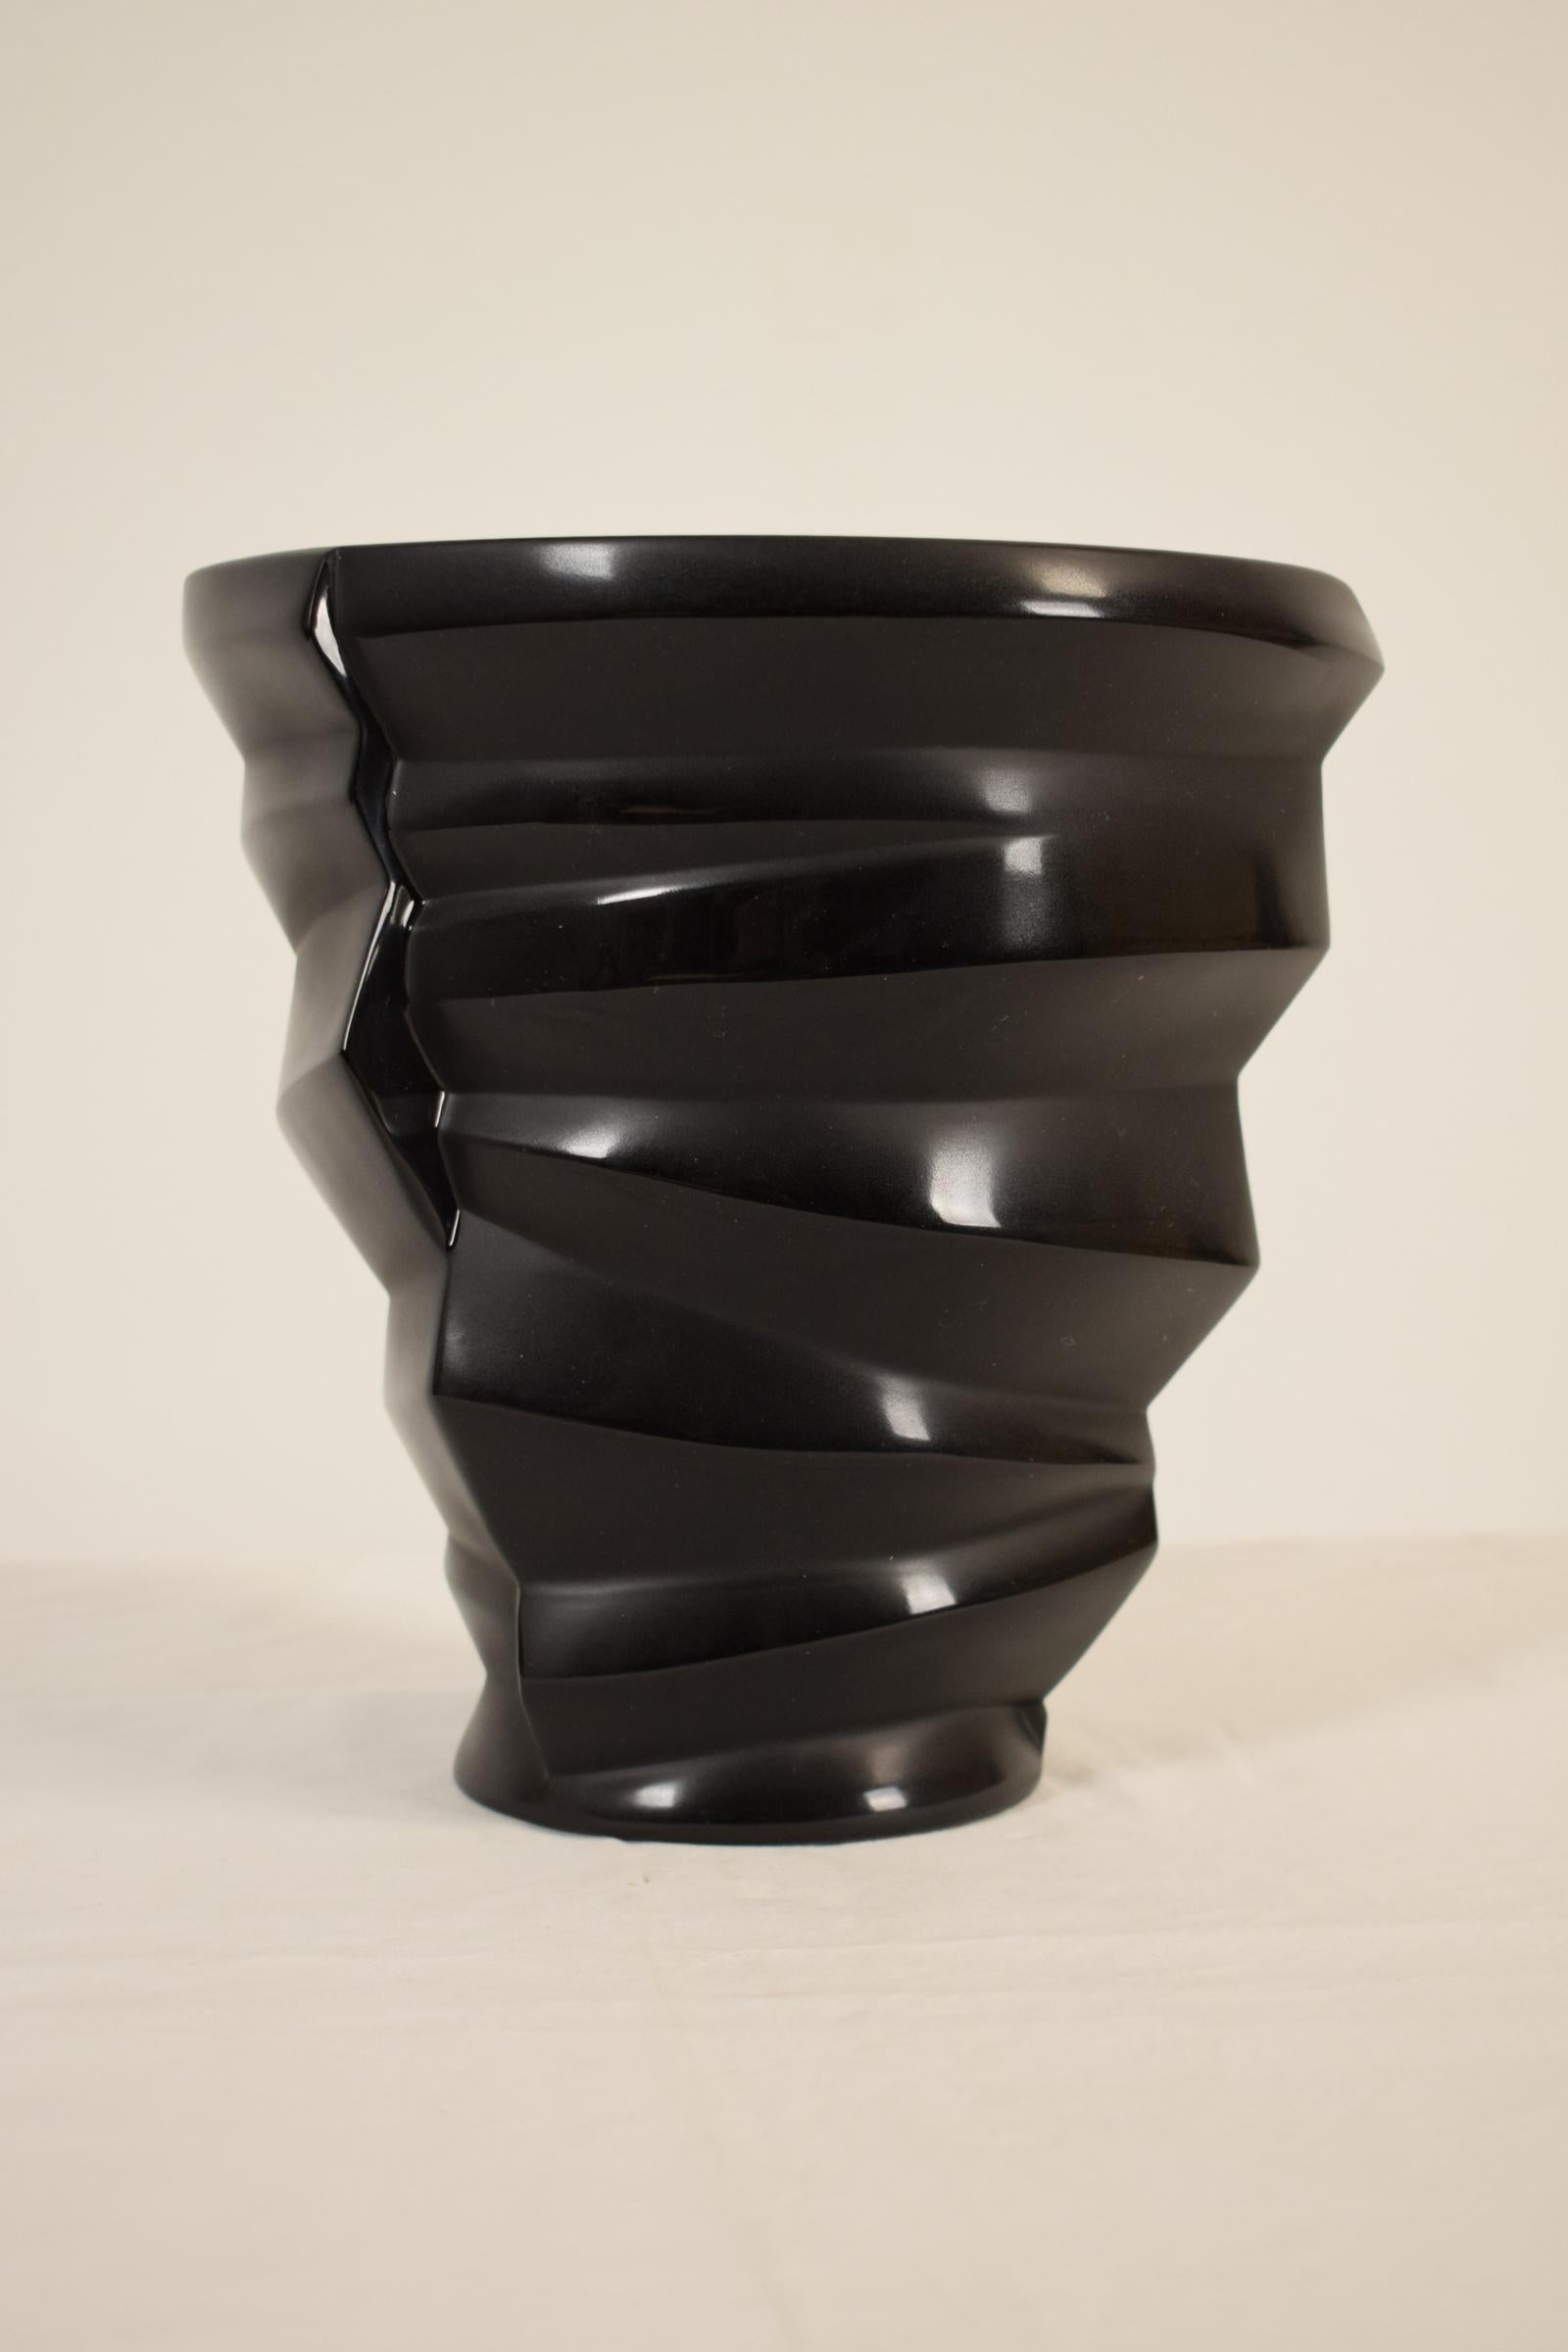 Dixie Black Crystal Vase Collection, Lalique, France, 21st century
Engraved signature and numbering: copy no. 266/999

The vase called Dixie of the Black Collection manufacture Lalique was made in France in 999 runs of which the present number is